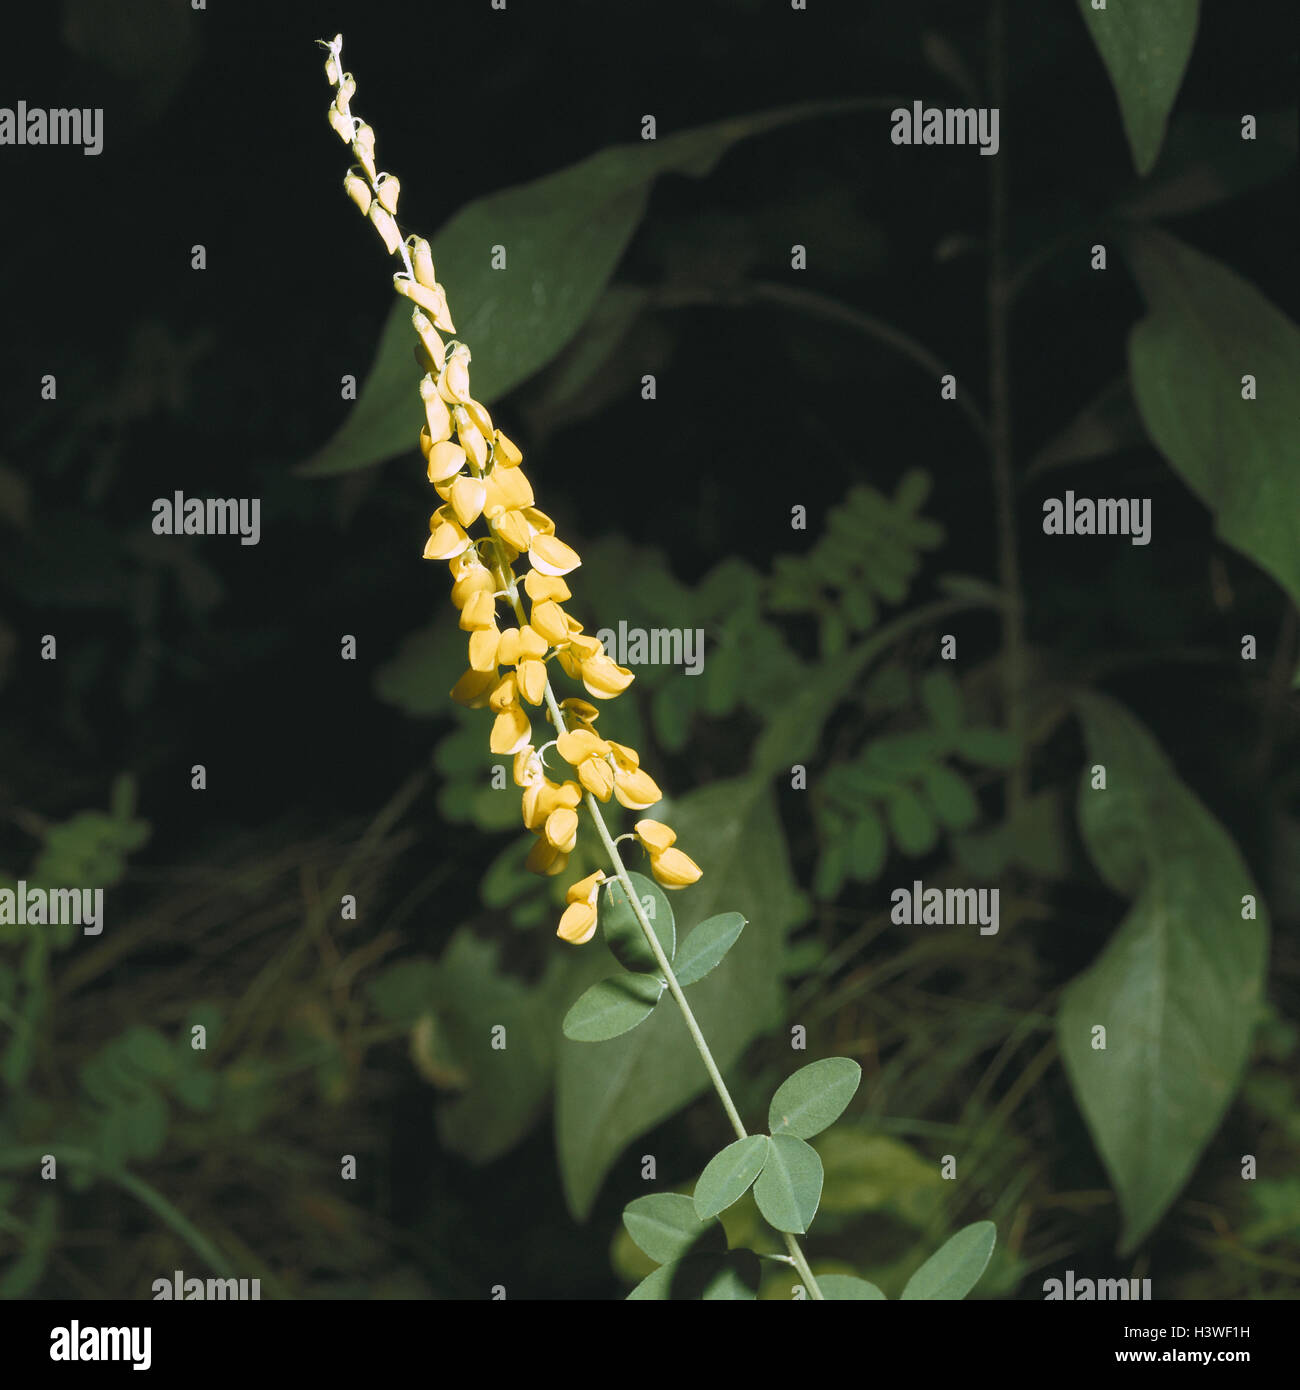 Black-growing nanny-goat clover, Cytisus nigricans, nature, botany, flora, plants, flower, wild flowers, forest flower, Faboideae, bean shrub, Cytisus, blossoms, blossom, yellow Stock Photo